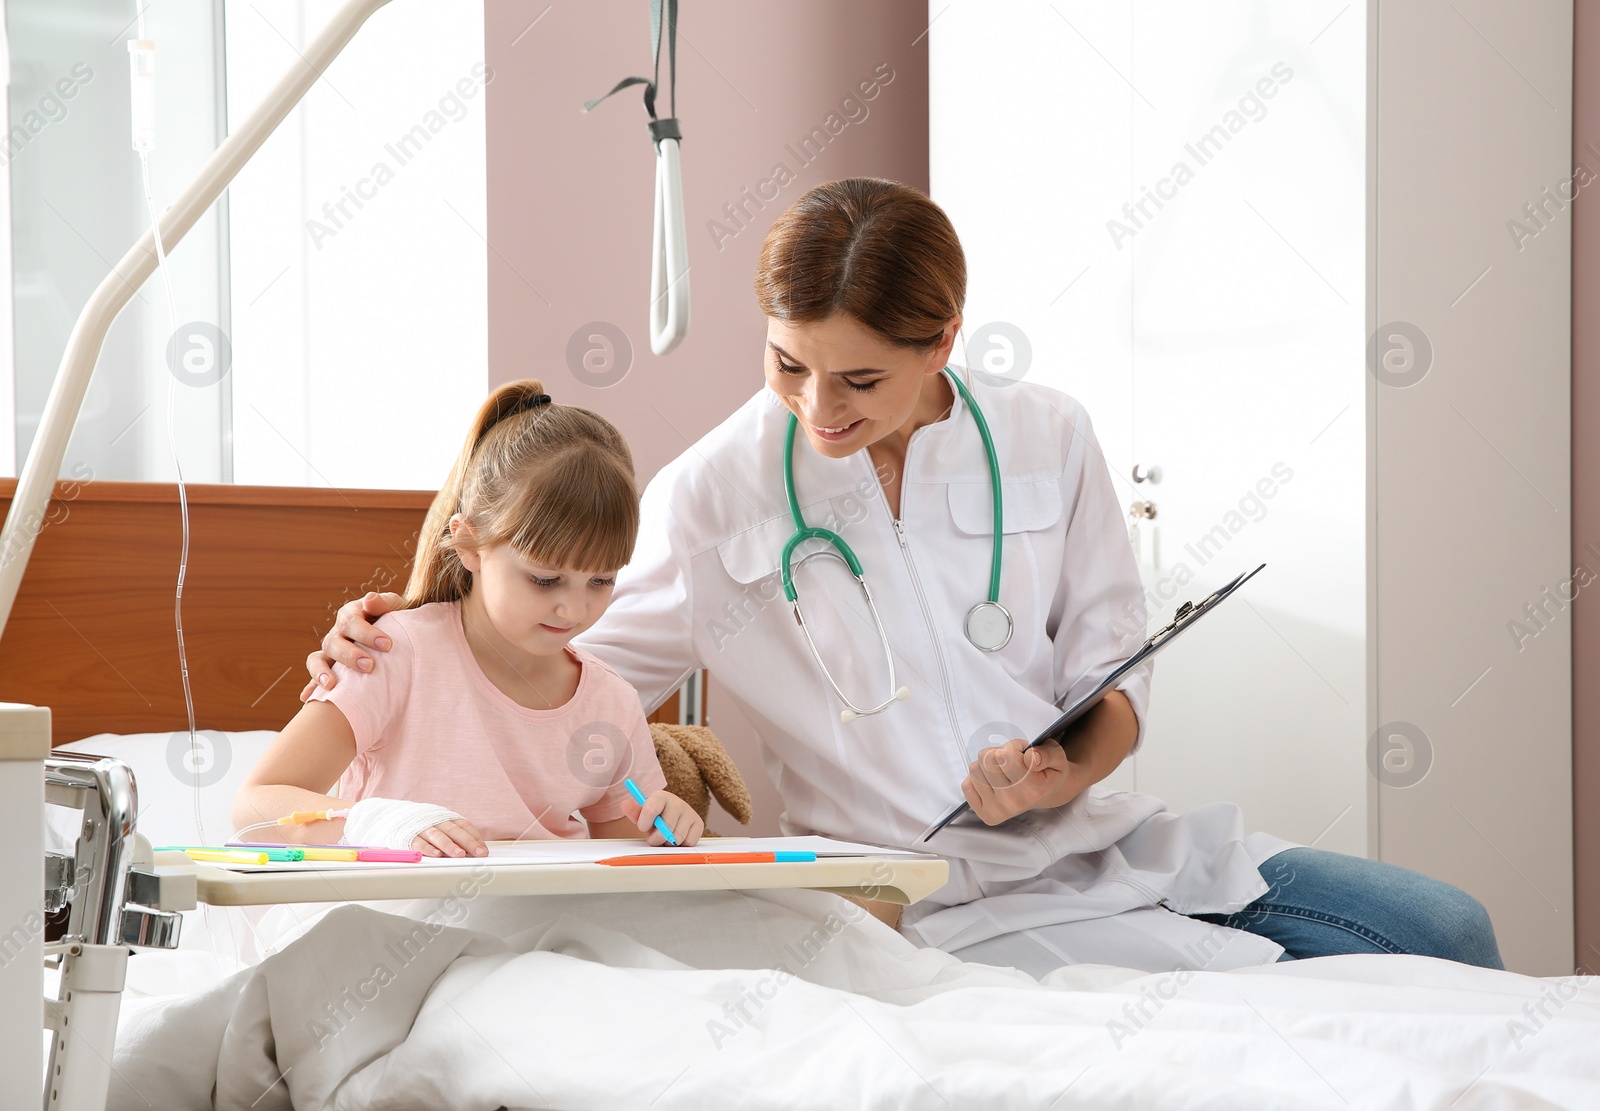 Photo of Little child with intravenous drip drawing in hospital bed during doctor's visit